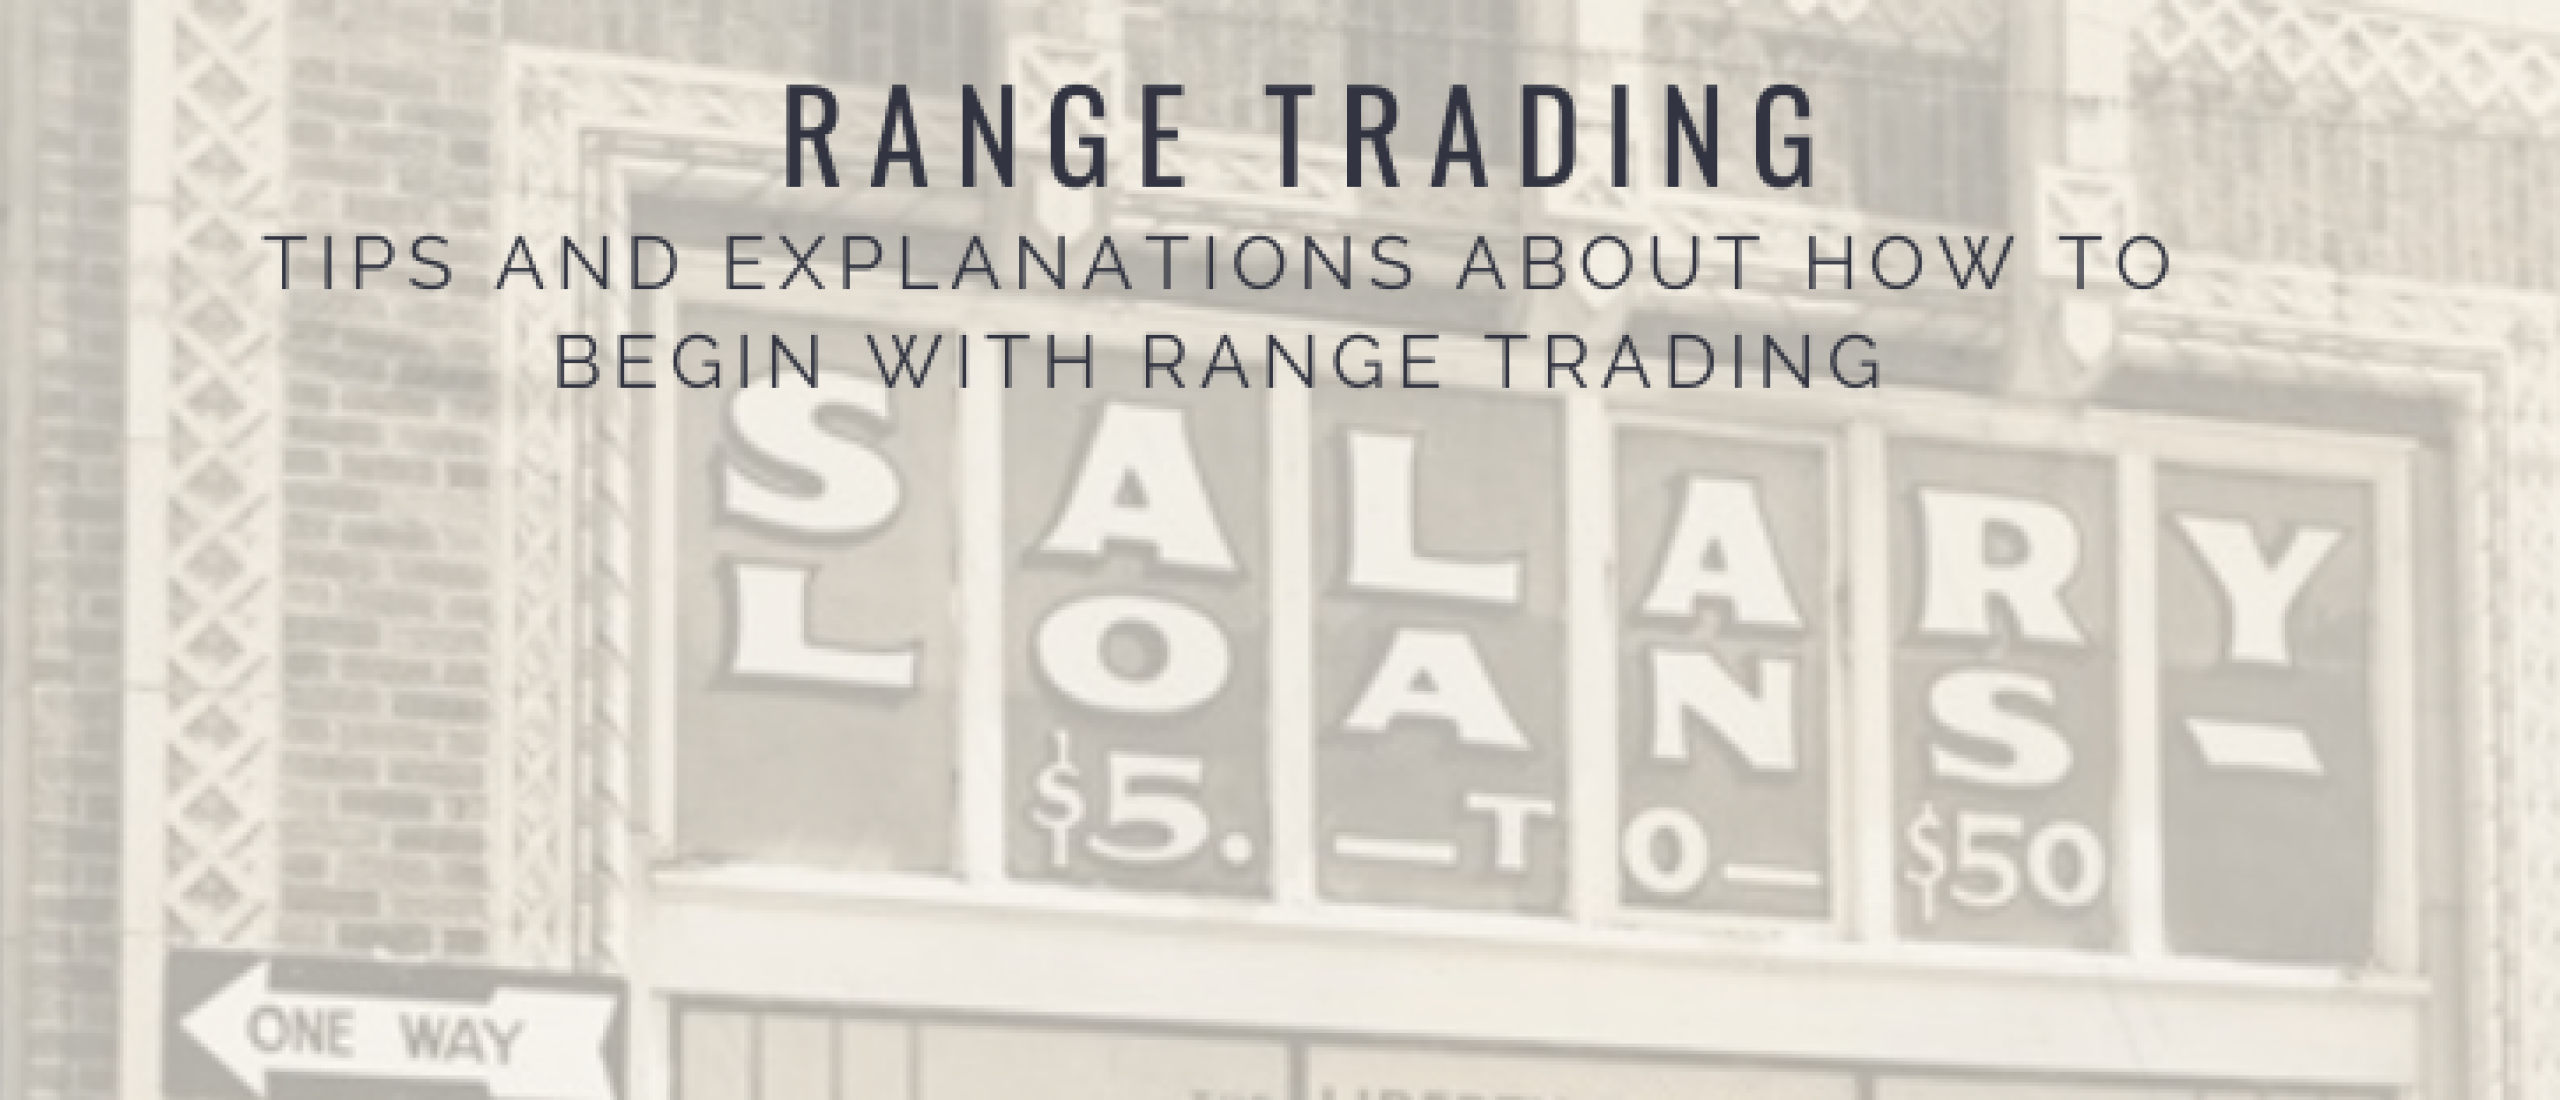 Range Trading Strategy: Tips and Explanations for Beginners